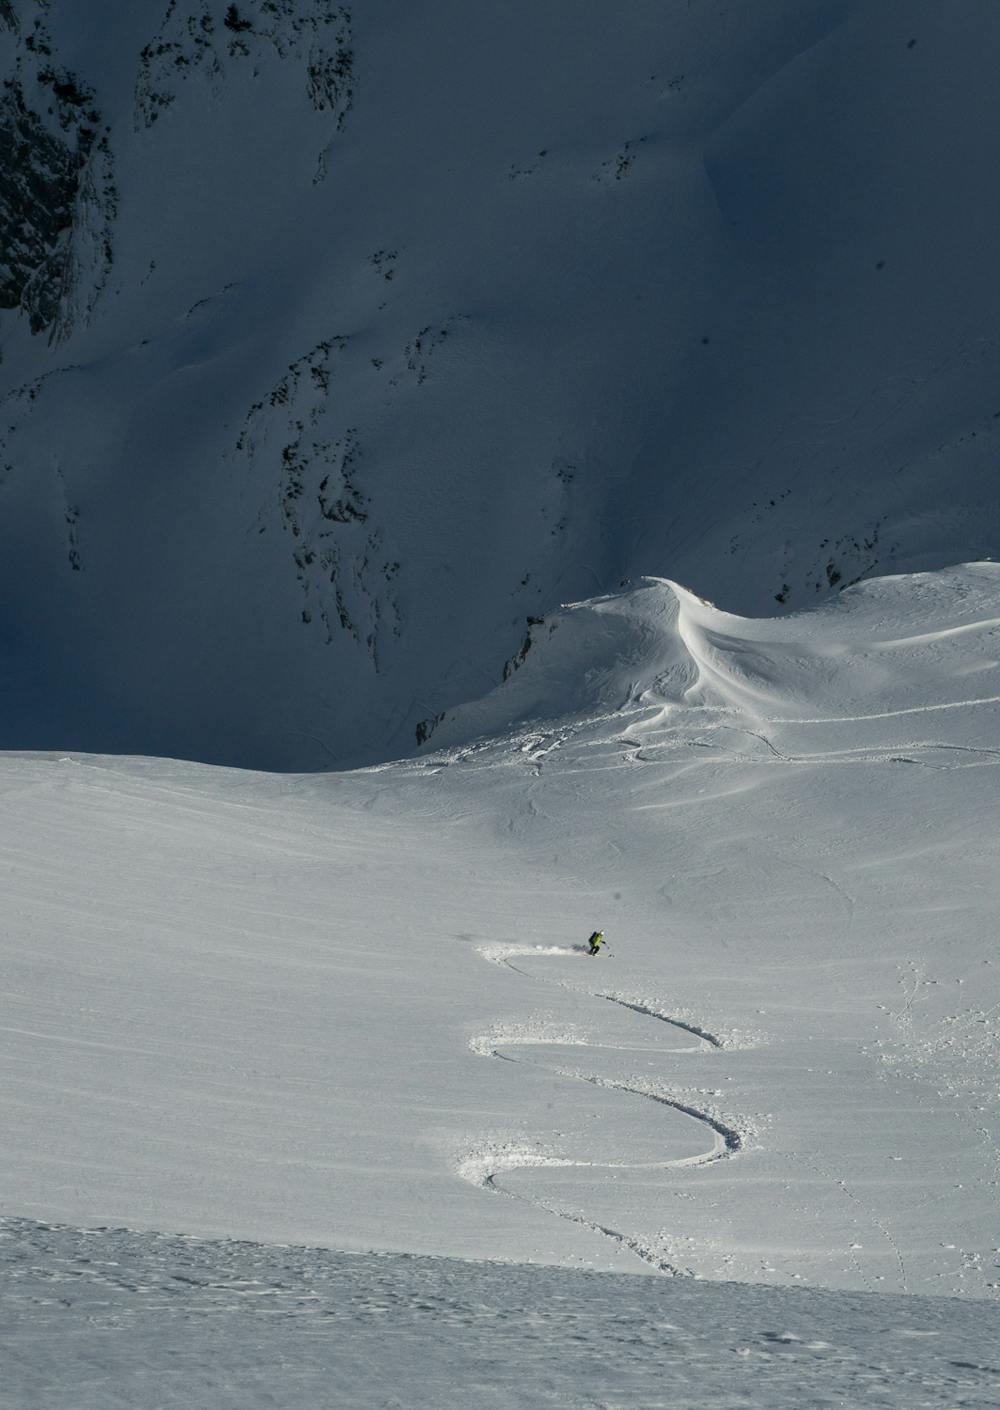 Skiing the face below the summit